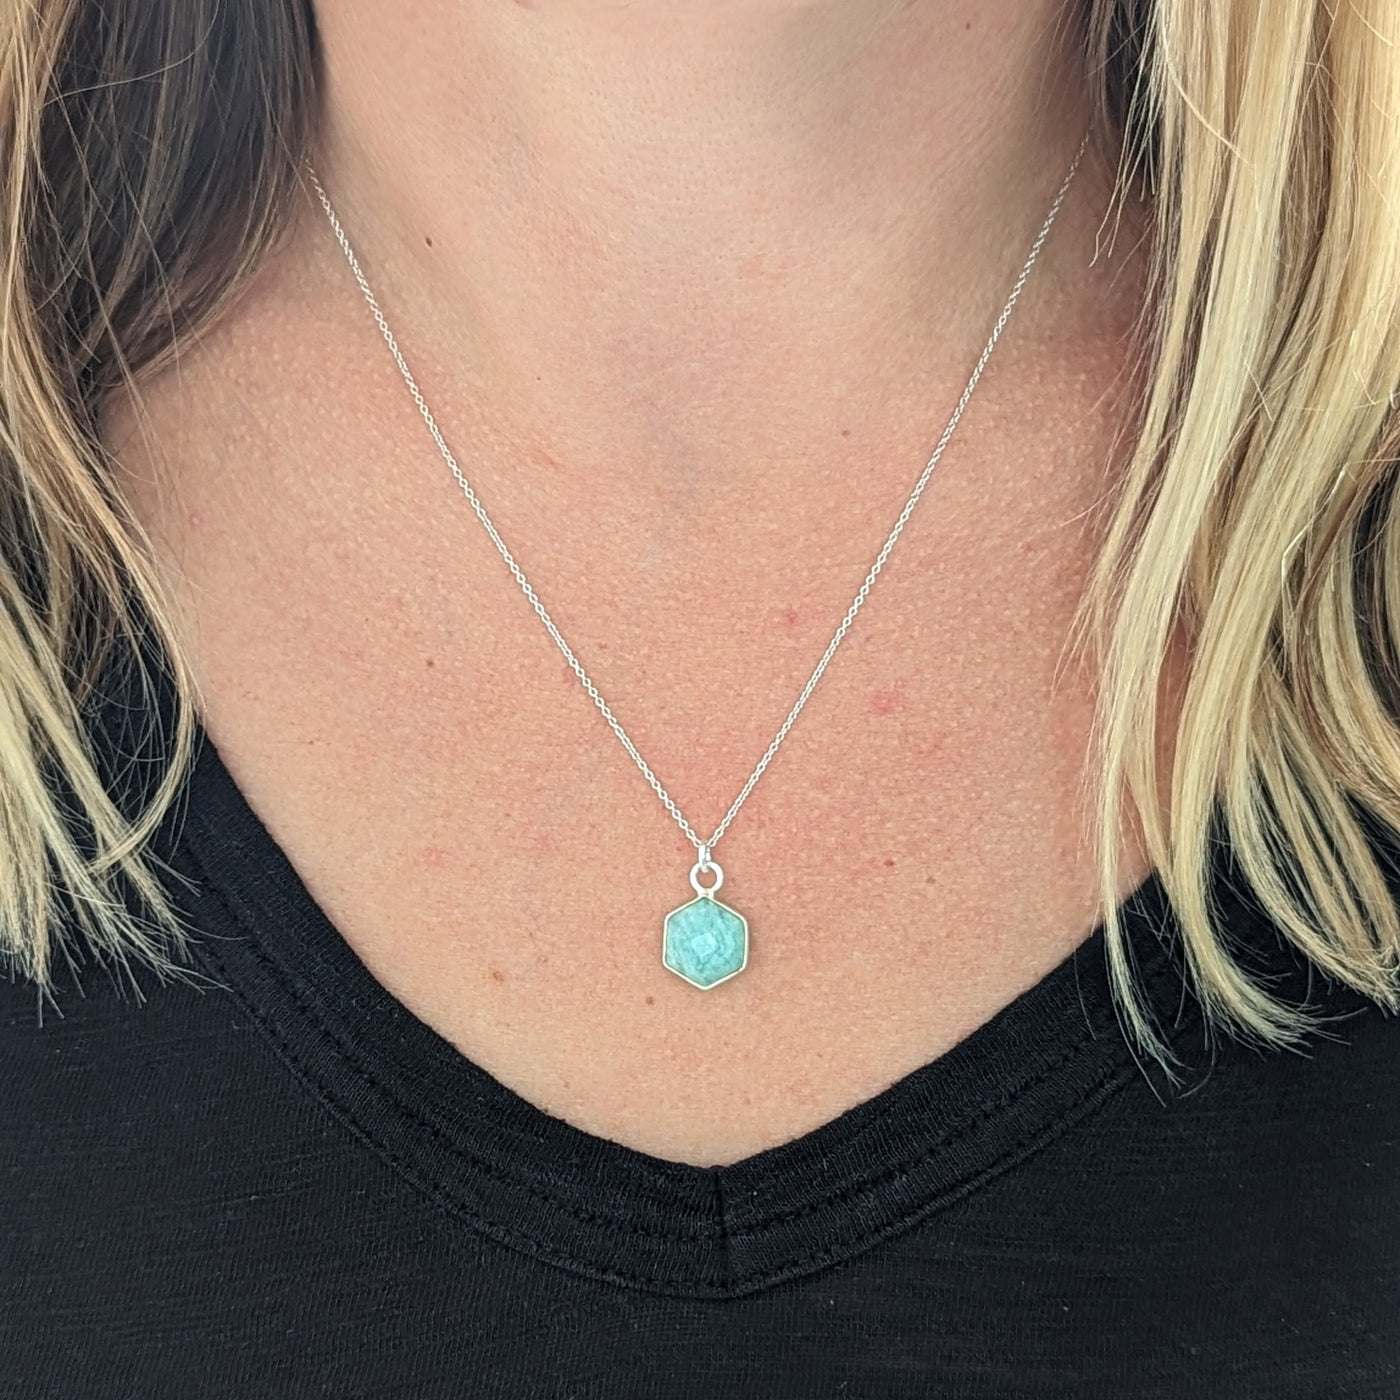 The Hexagon Amazonite Gemstone Necklace - Sterling Silver